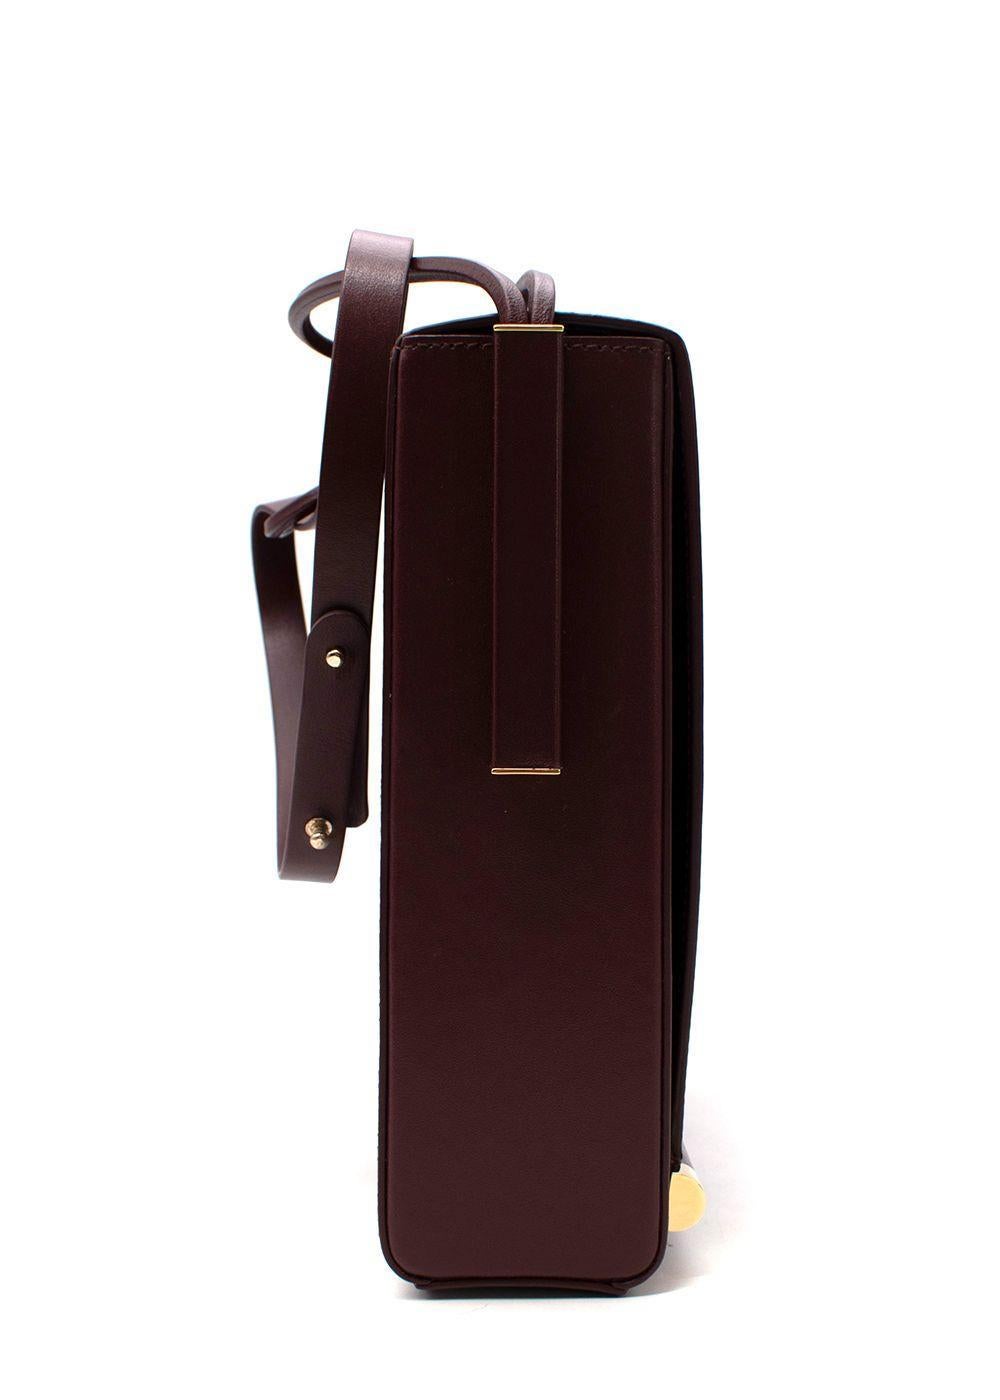 Roksanda Burgundy Leather Flat Box Bag

- Sturdy rectangular shape with unusual double strap feature
- Long front flap with gold-tone metal hardware
- Opens to a navy leather-lined interior

Material:
Leather

Made in Italy

PLEASE NOTE, THESE ITEMS